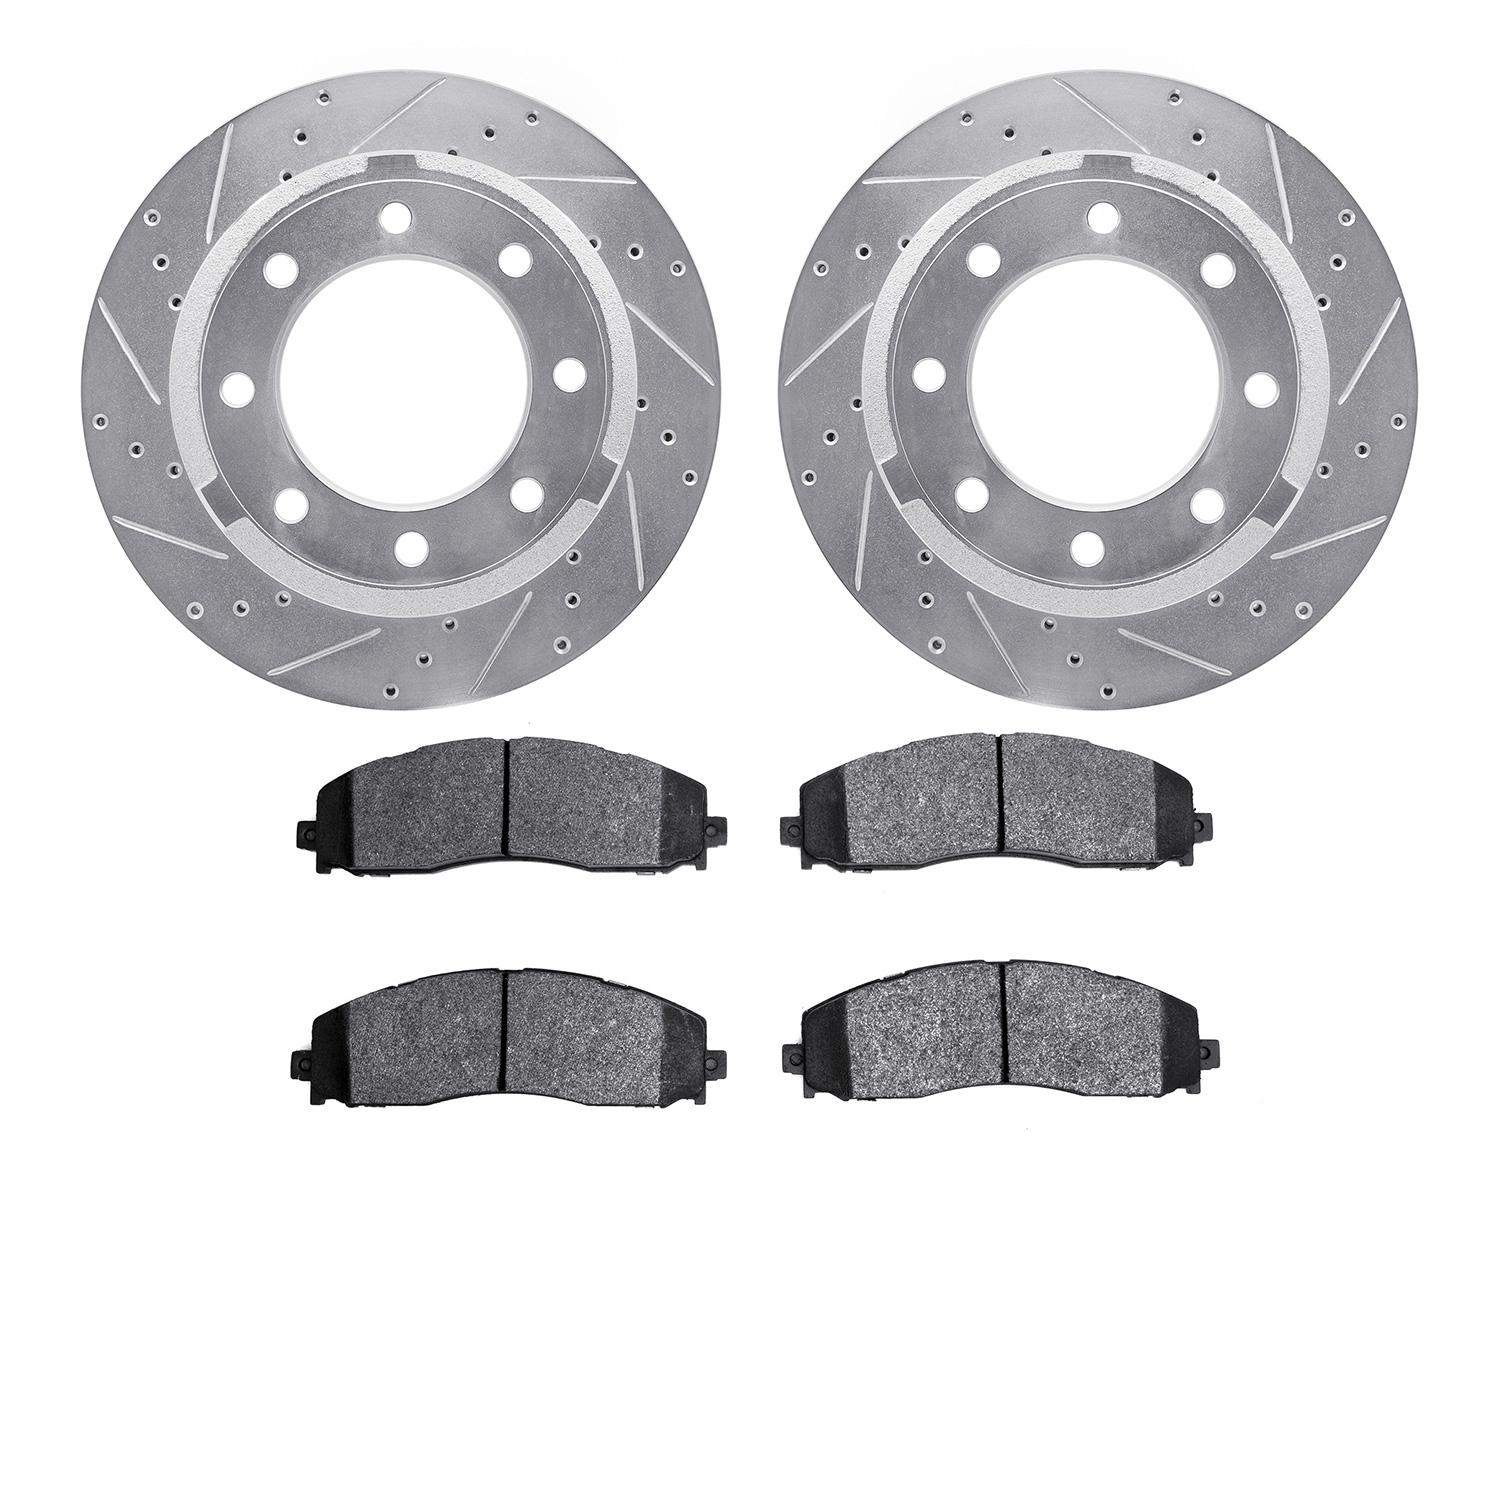 7402-54101 Drilled/Slotted Brake Rotors with Ultimate-Duty Brake Pads Kit [Silver], Fits Select Ford/Lincoln/Mercury/Mazda, Posi